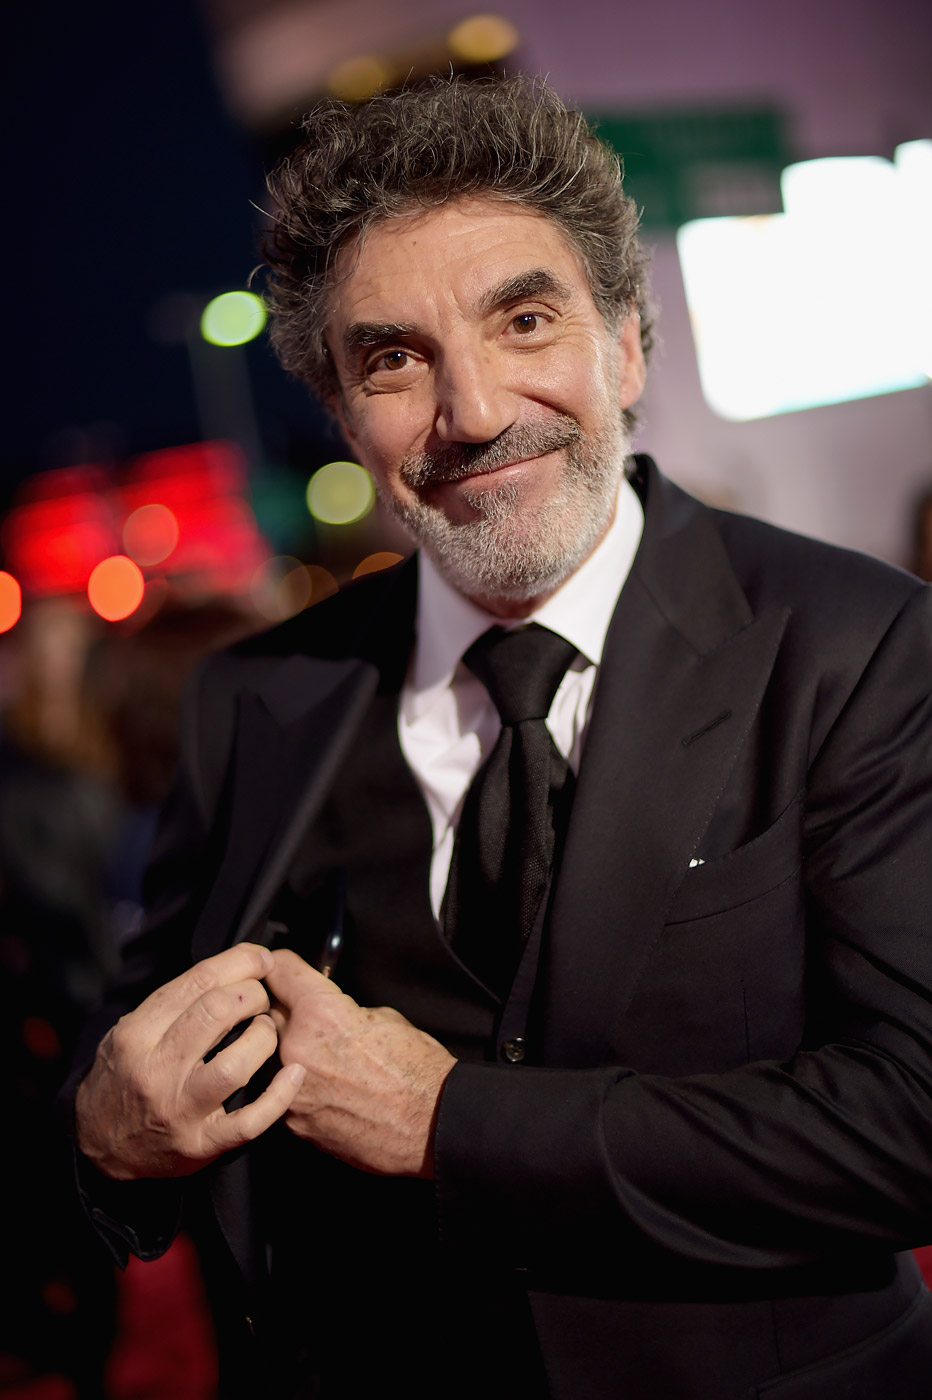 Chuck Lorre attends The 41st Annual People's Choice Awards at Nokia Theatre LA Live on Jan. 7, 2015 in Los Angeles, Calif. (Jason Kempin—Getty Images)